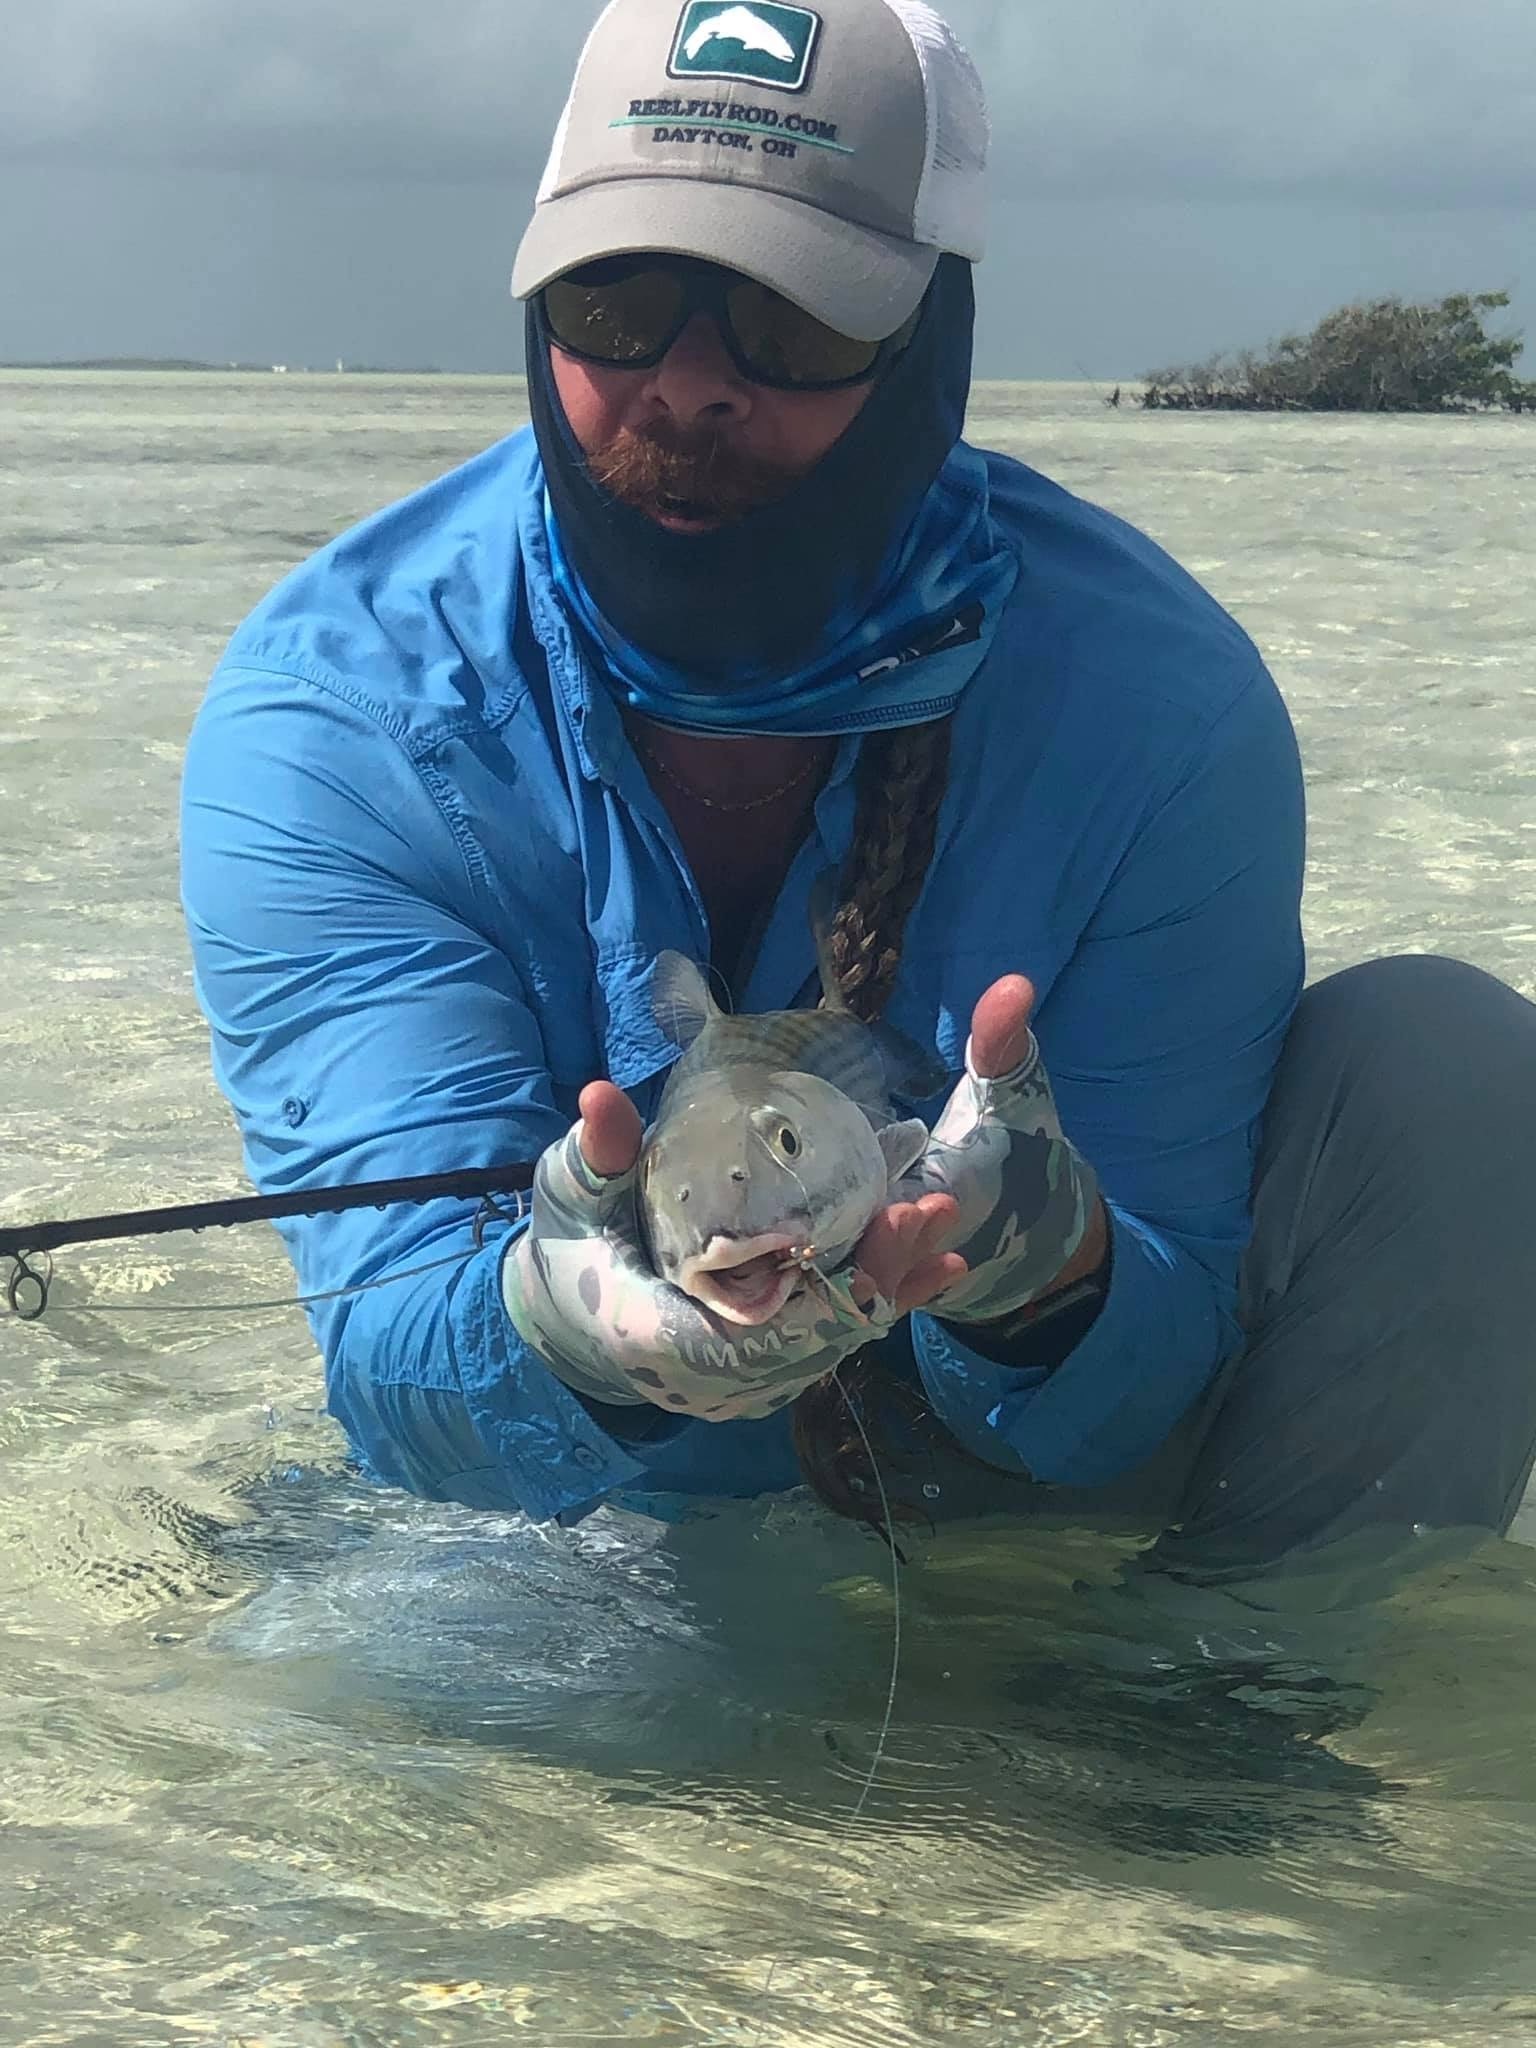 Josh showing a newly caught bonefish while kneeling on a sand flat